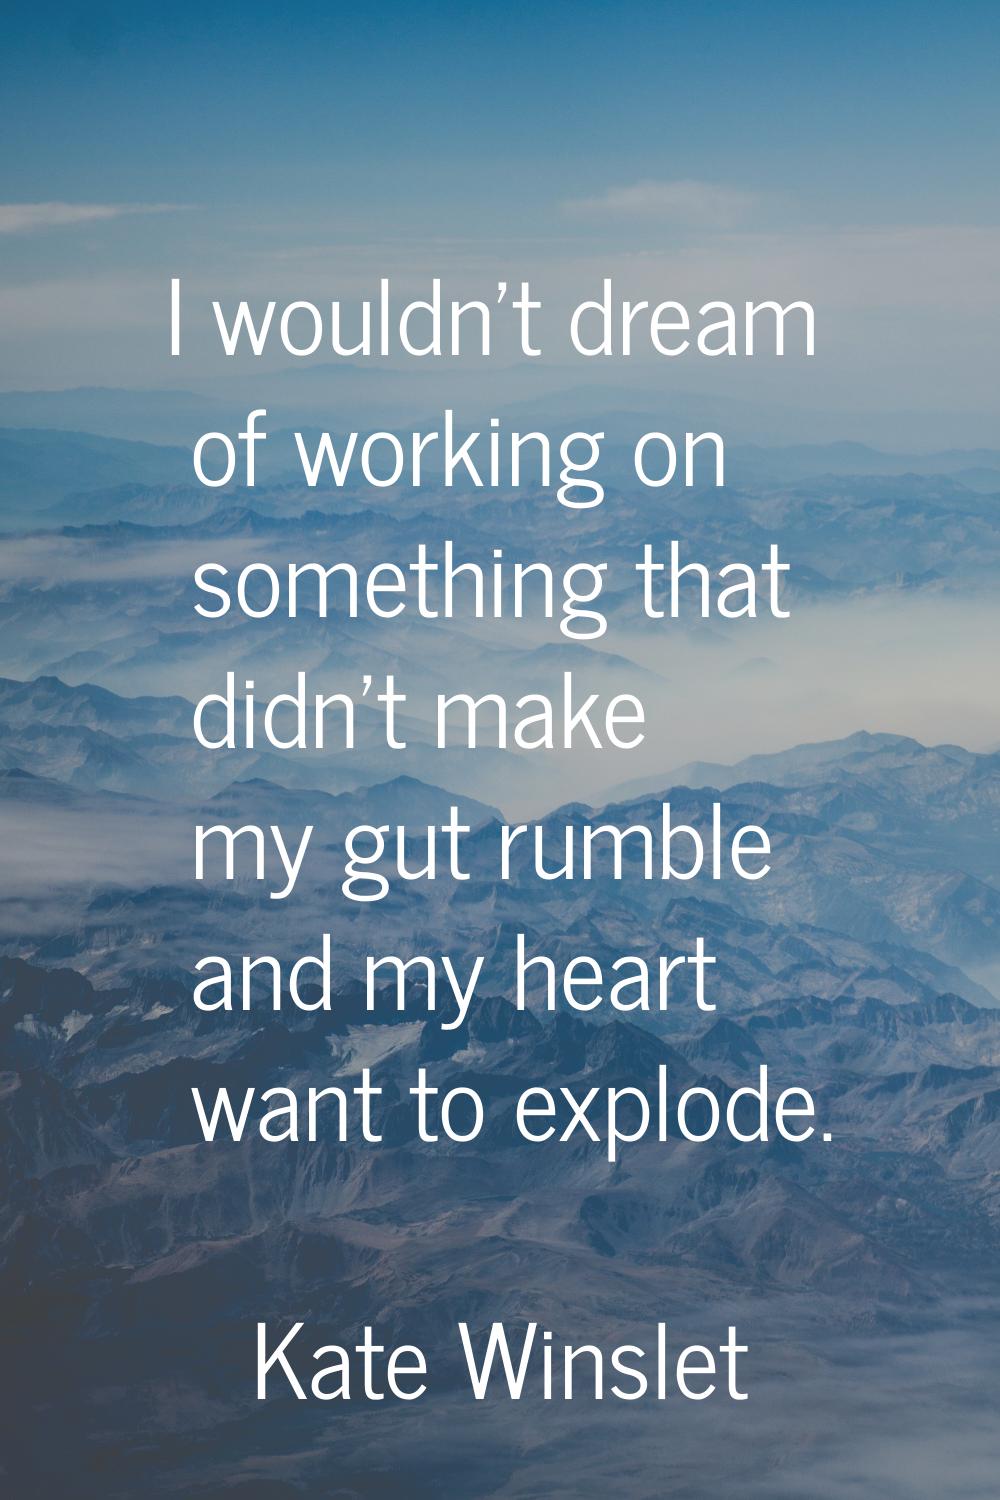 I wouldn't dream of working on something that didn't make my gut rumble and my heart want to explod